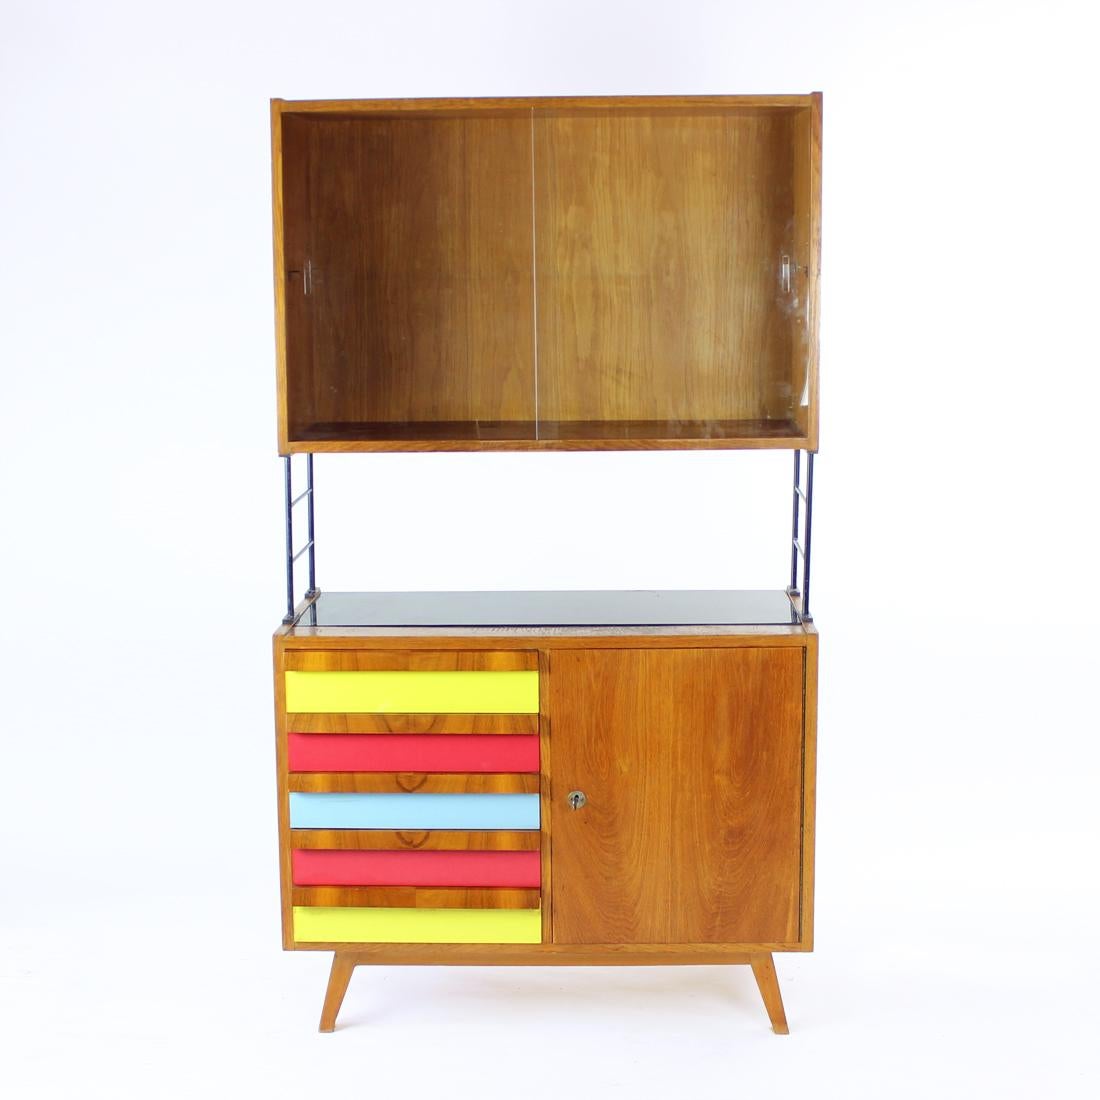 Beautiful tall mid-century cabinet with typical featured and details of the era. Produced in Czechoslovakia in 1960s. This cabinet is made of strong materials. The bottom sideboard part is made of oak wood with five colorful drawers and walnut